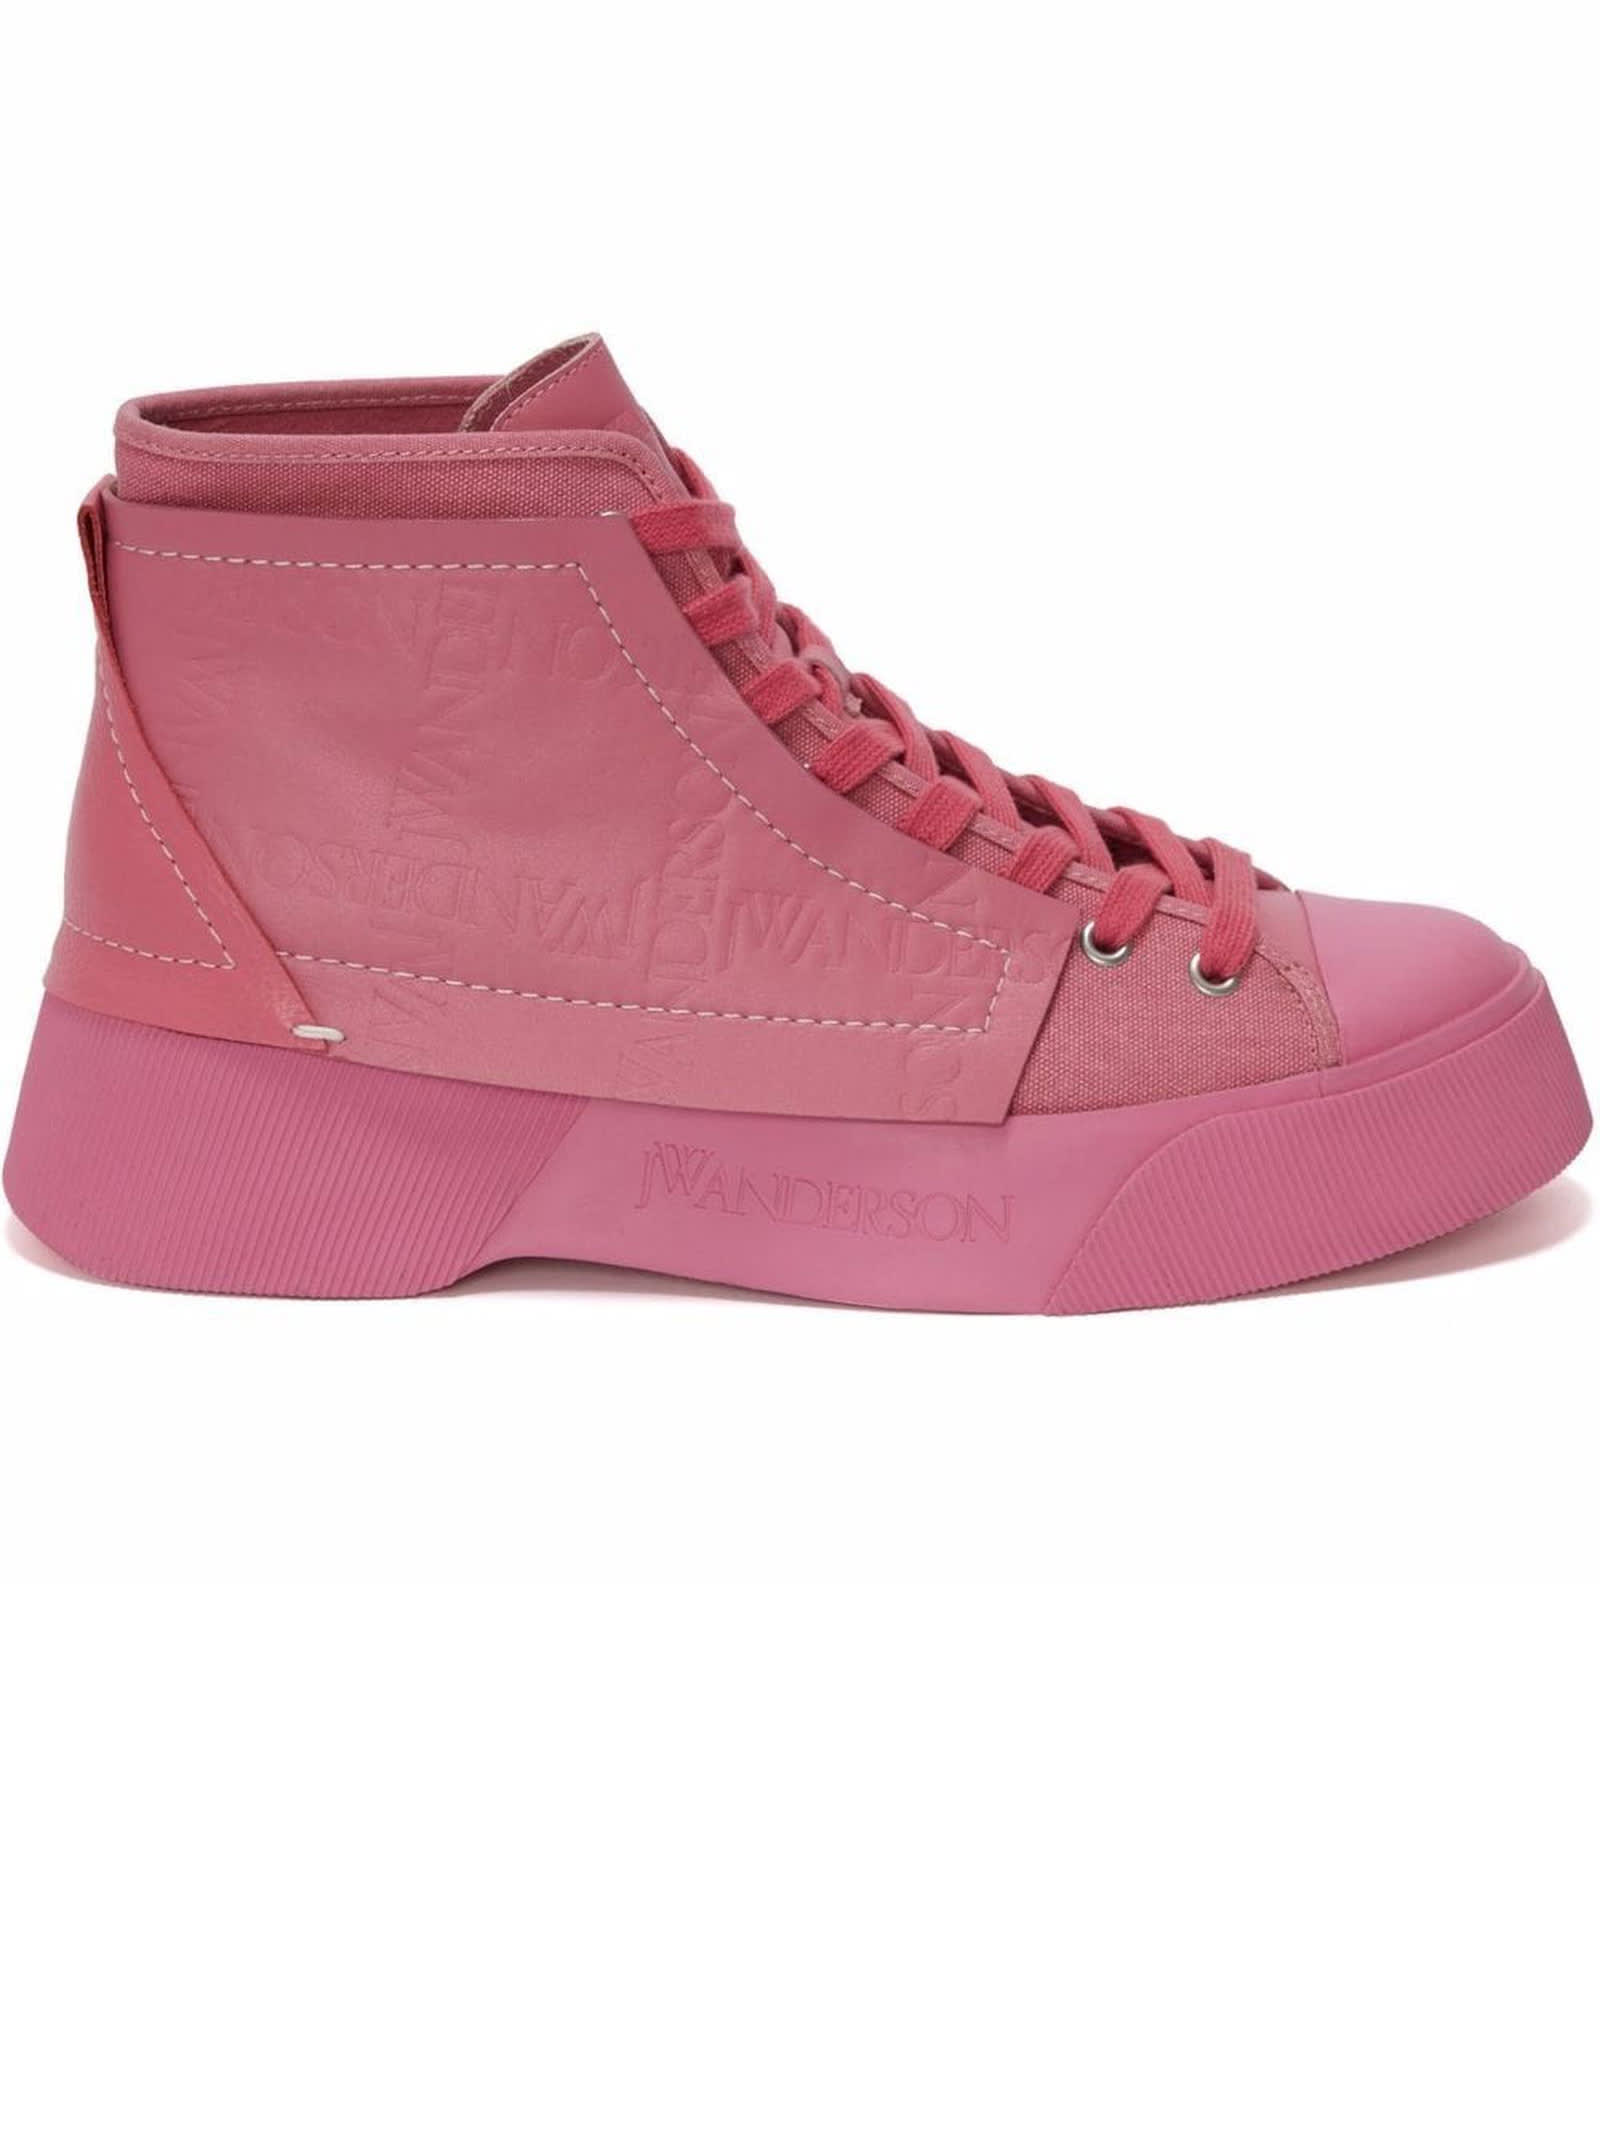 J.W. Anderson Pink Cotton And Leather Sneakers